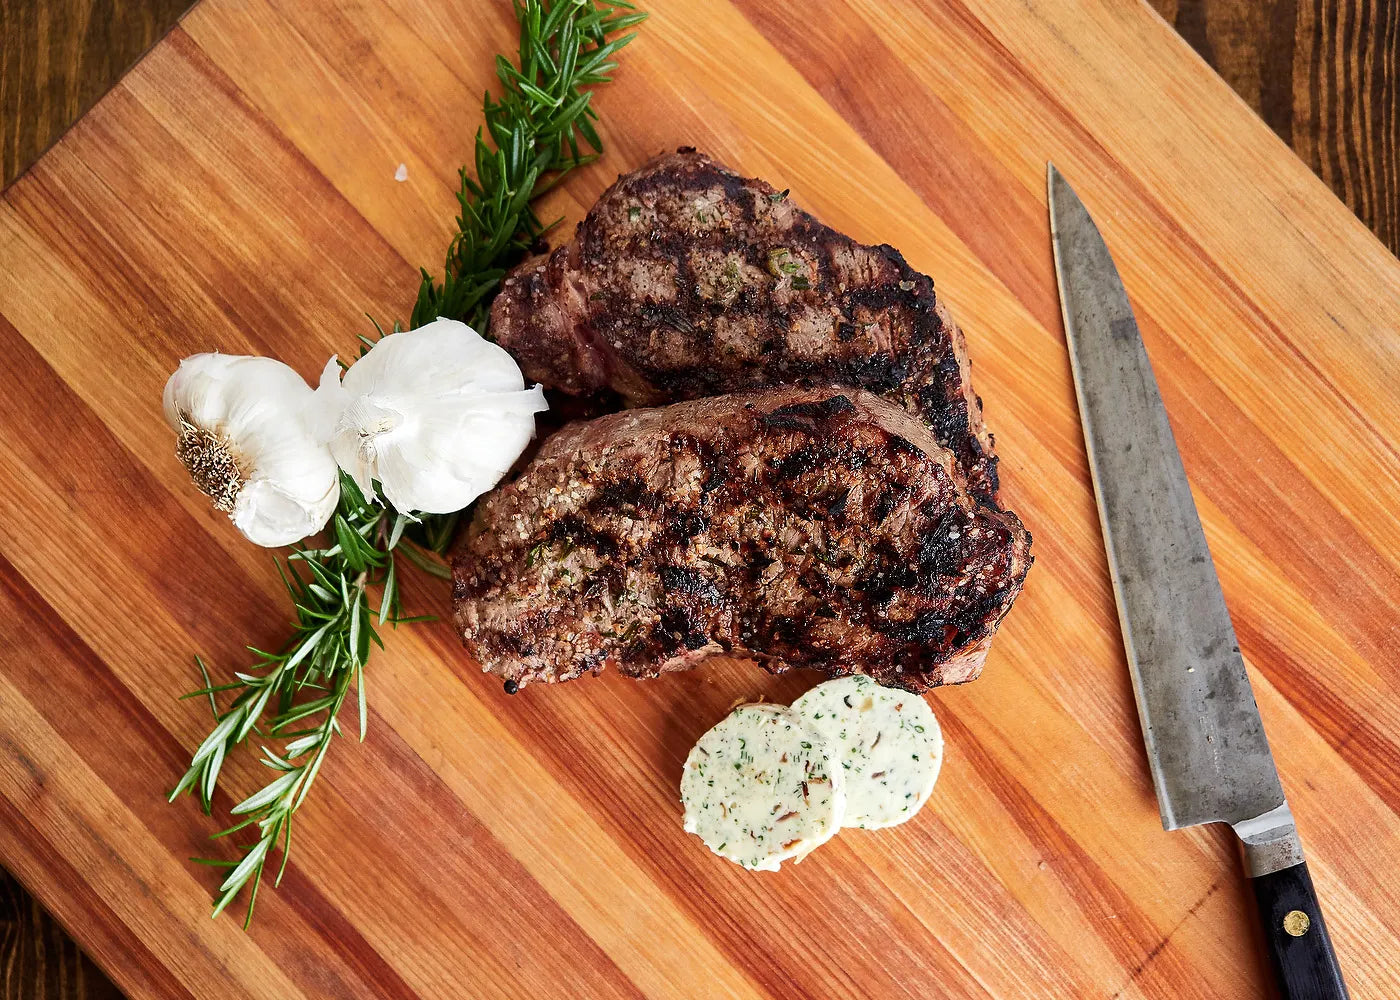 Table & Twine's Top 5 Grilling Tips